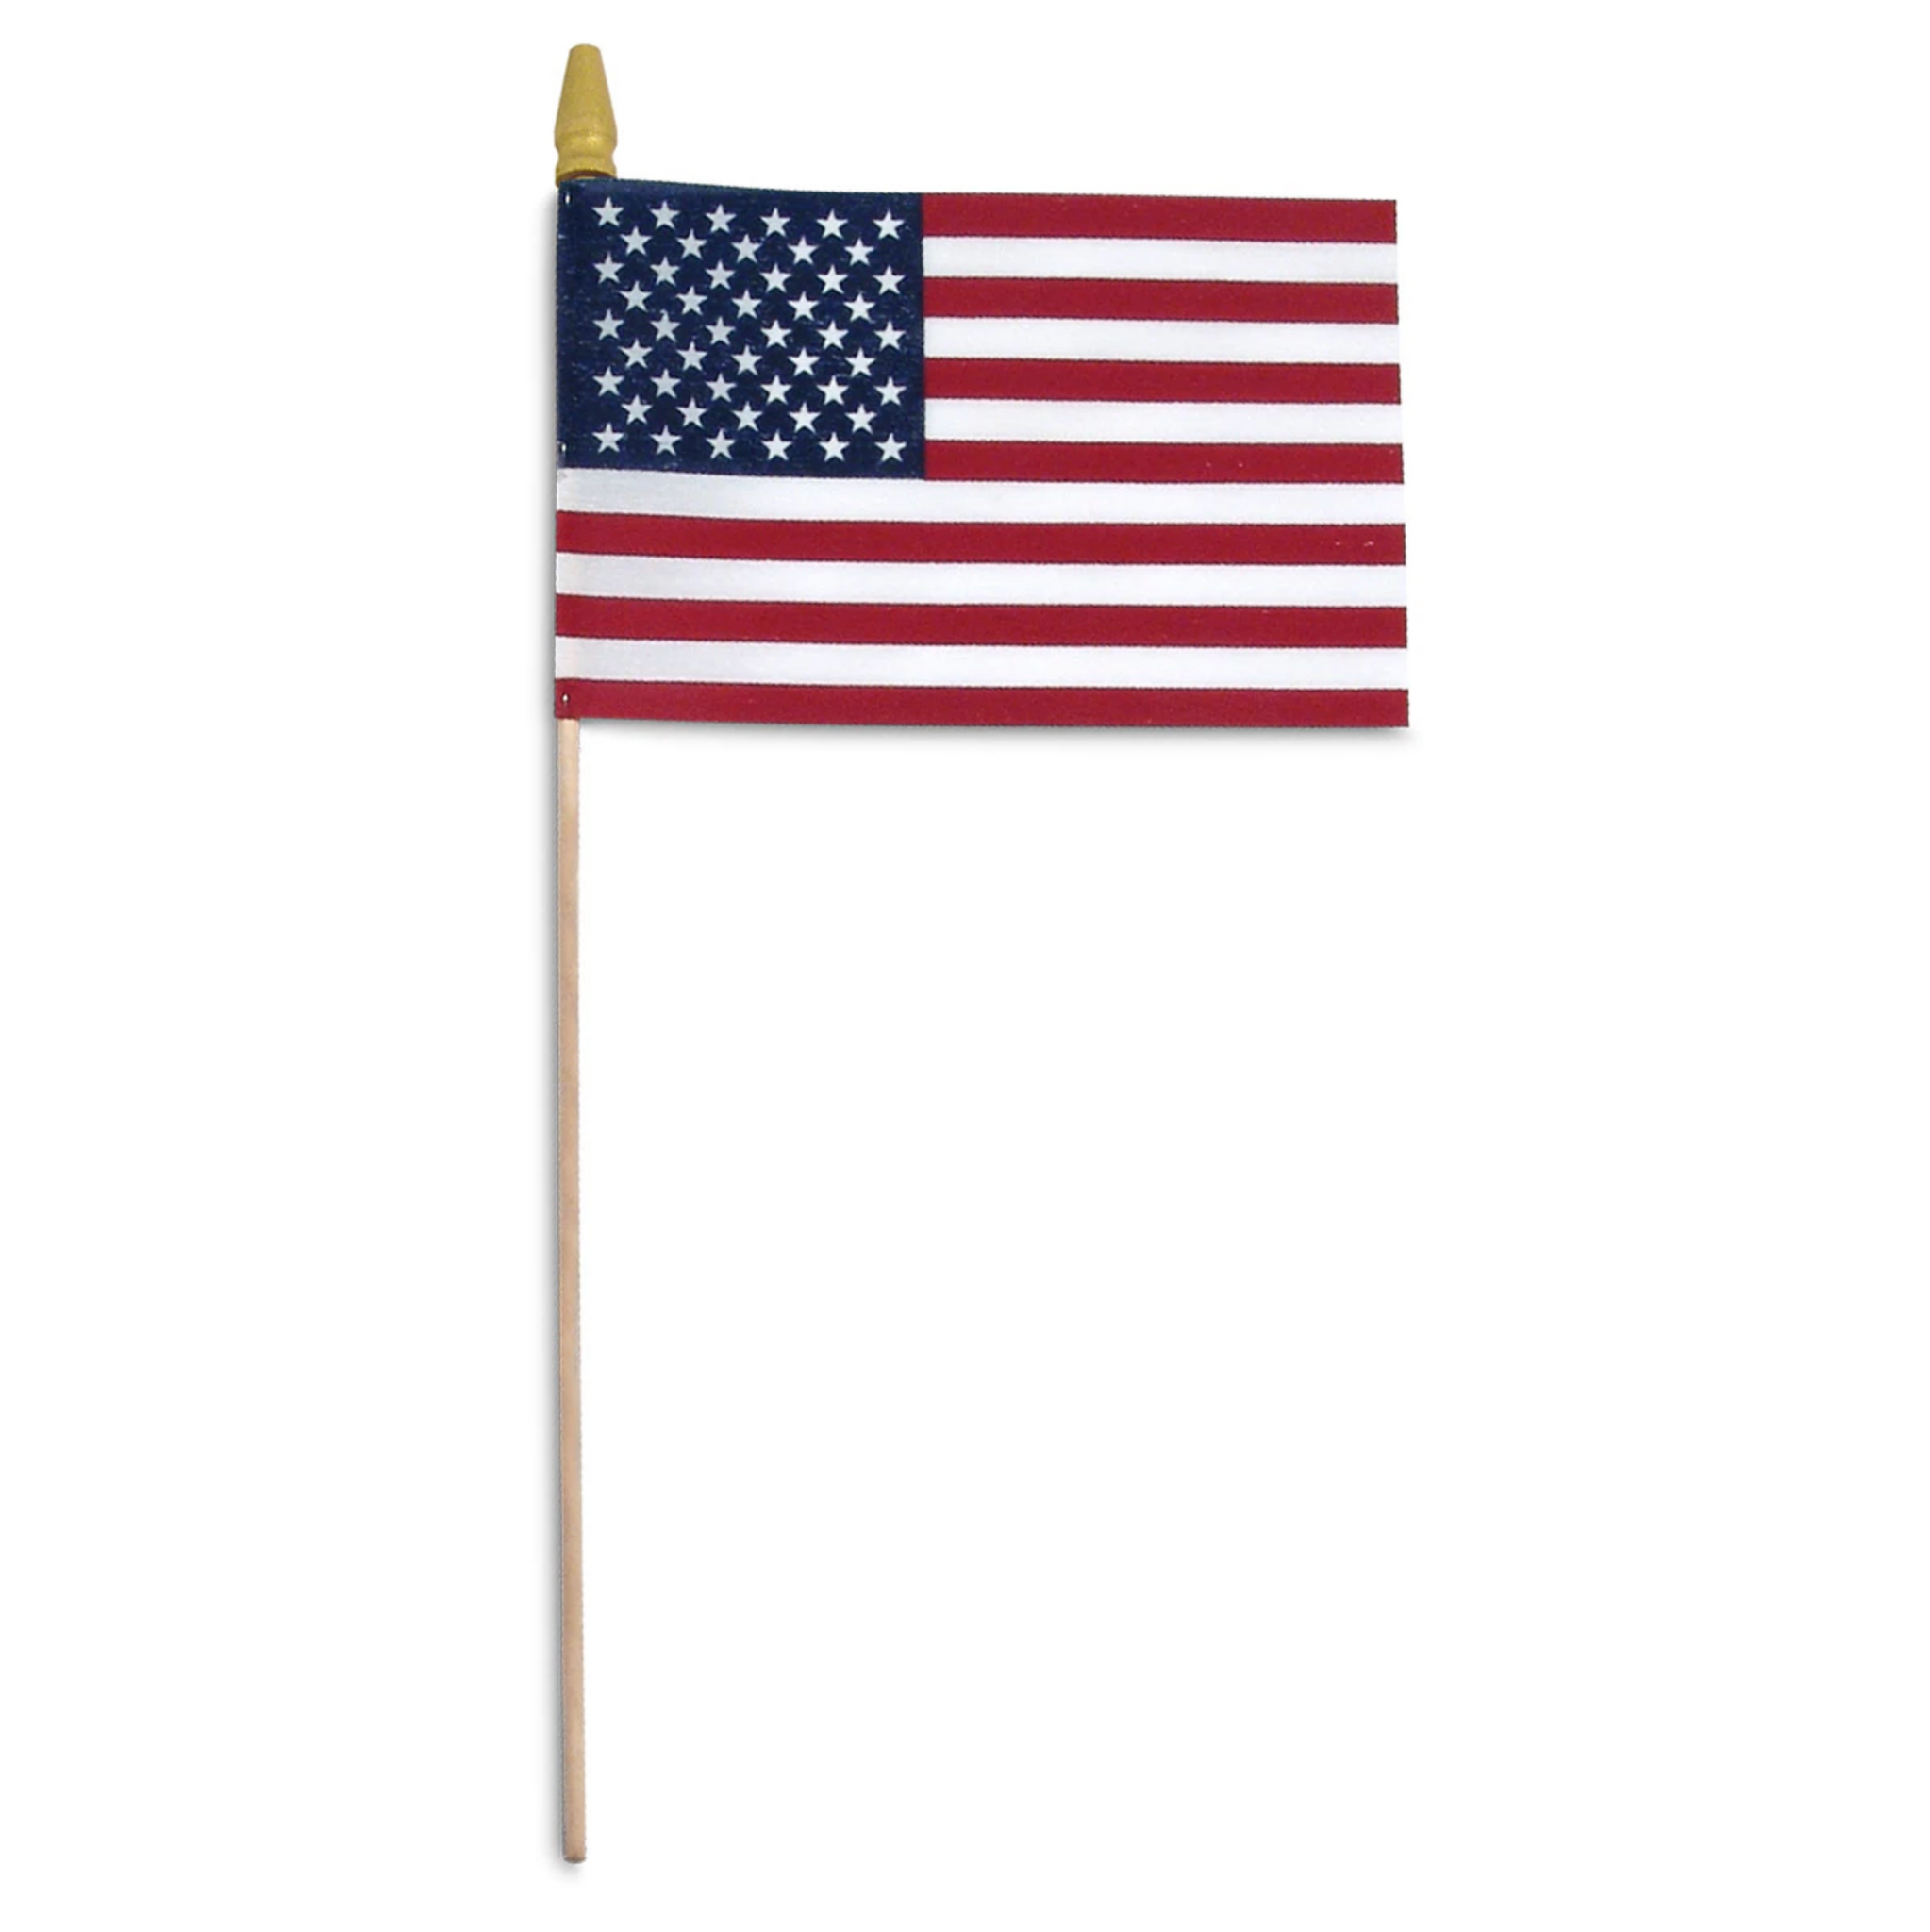 x 12 inch. Handheld Stick Flags with SpearTop. (Pack of 144) – Tutare 50